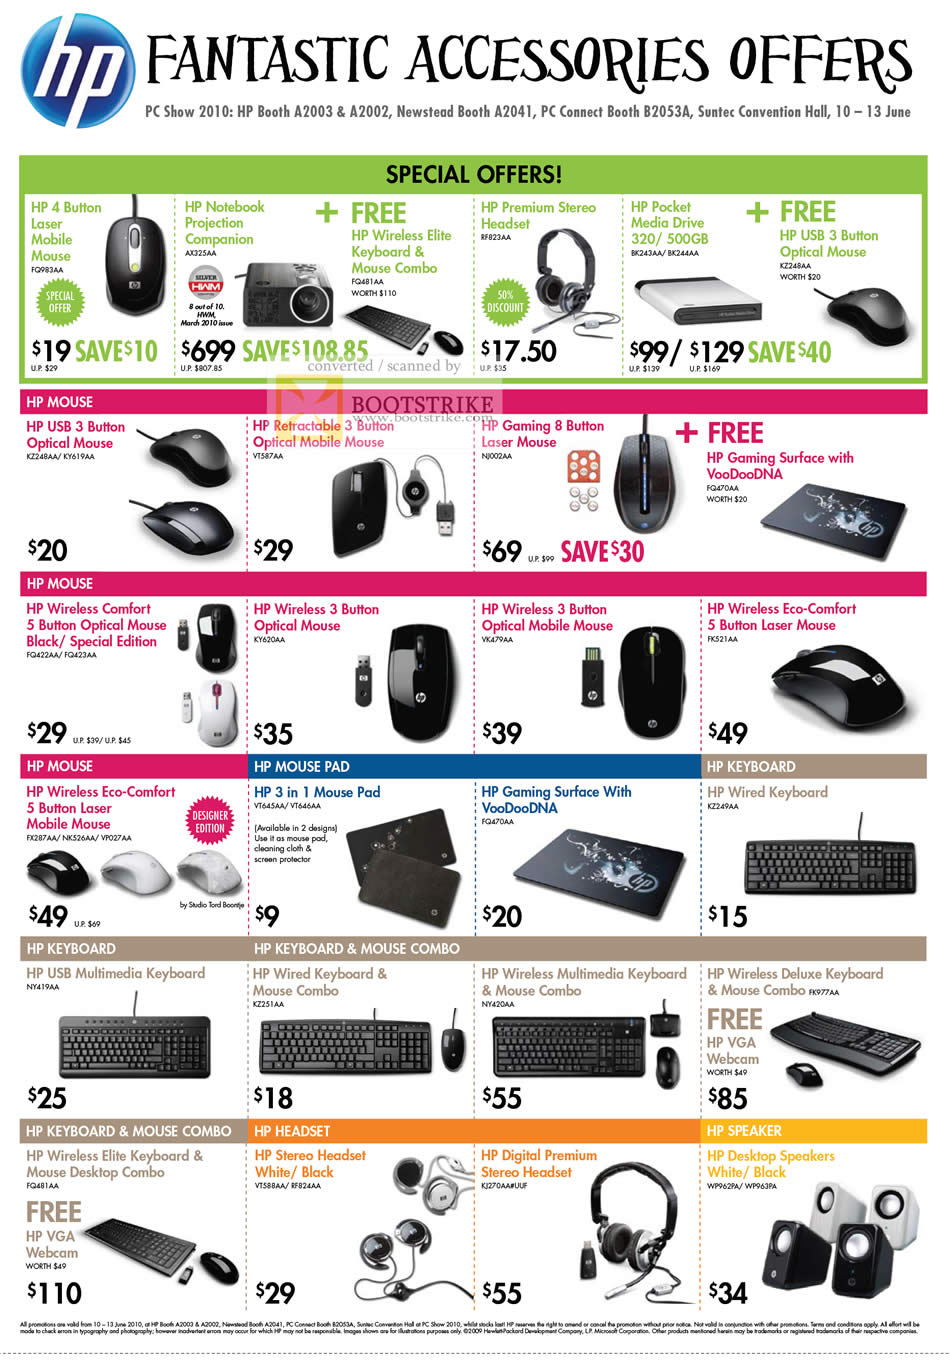 PC Show 2010 price list image brochure of HP Accessories Mouse Wireless COmfort Laser Mousepad Keyboard Headset Speaker